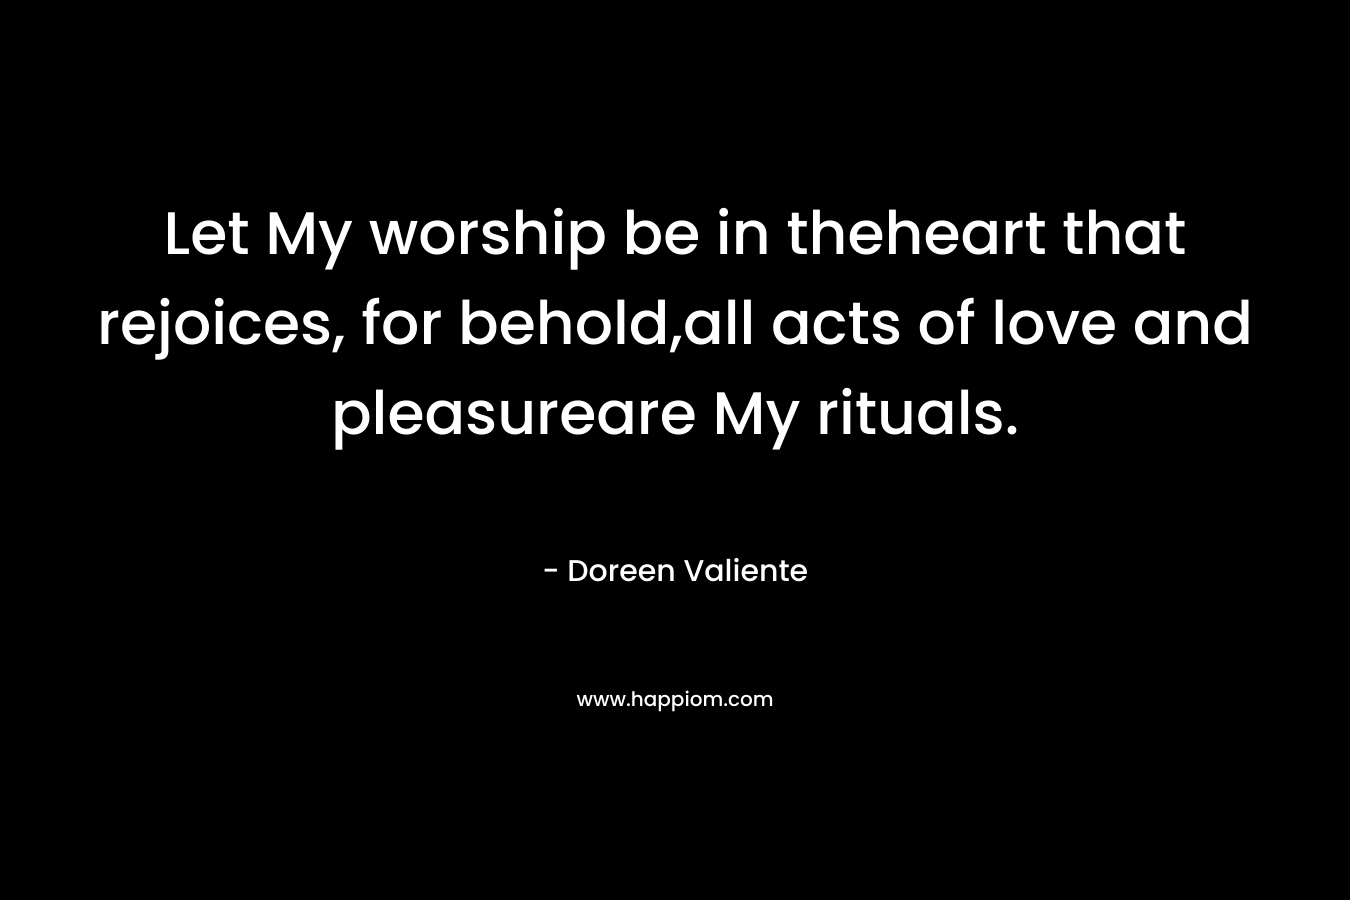 Let My worship be in theheart that rejoices, for behold,all acts of love and pleasureare My rituals. – Doreen Valiente